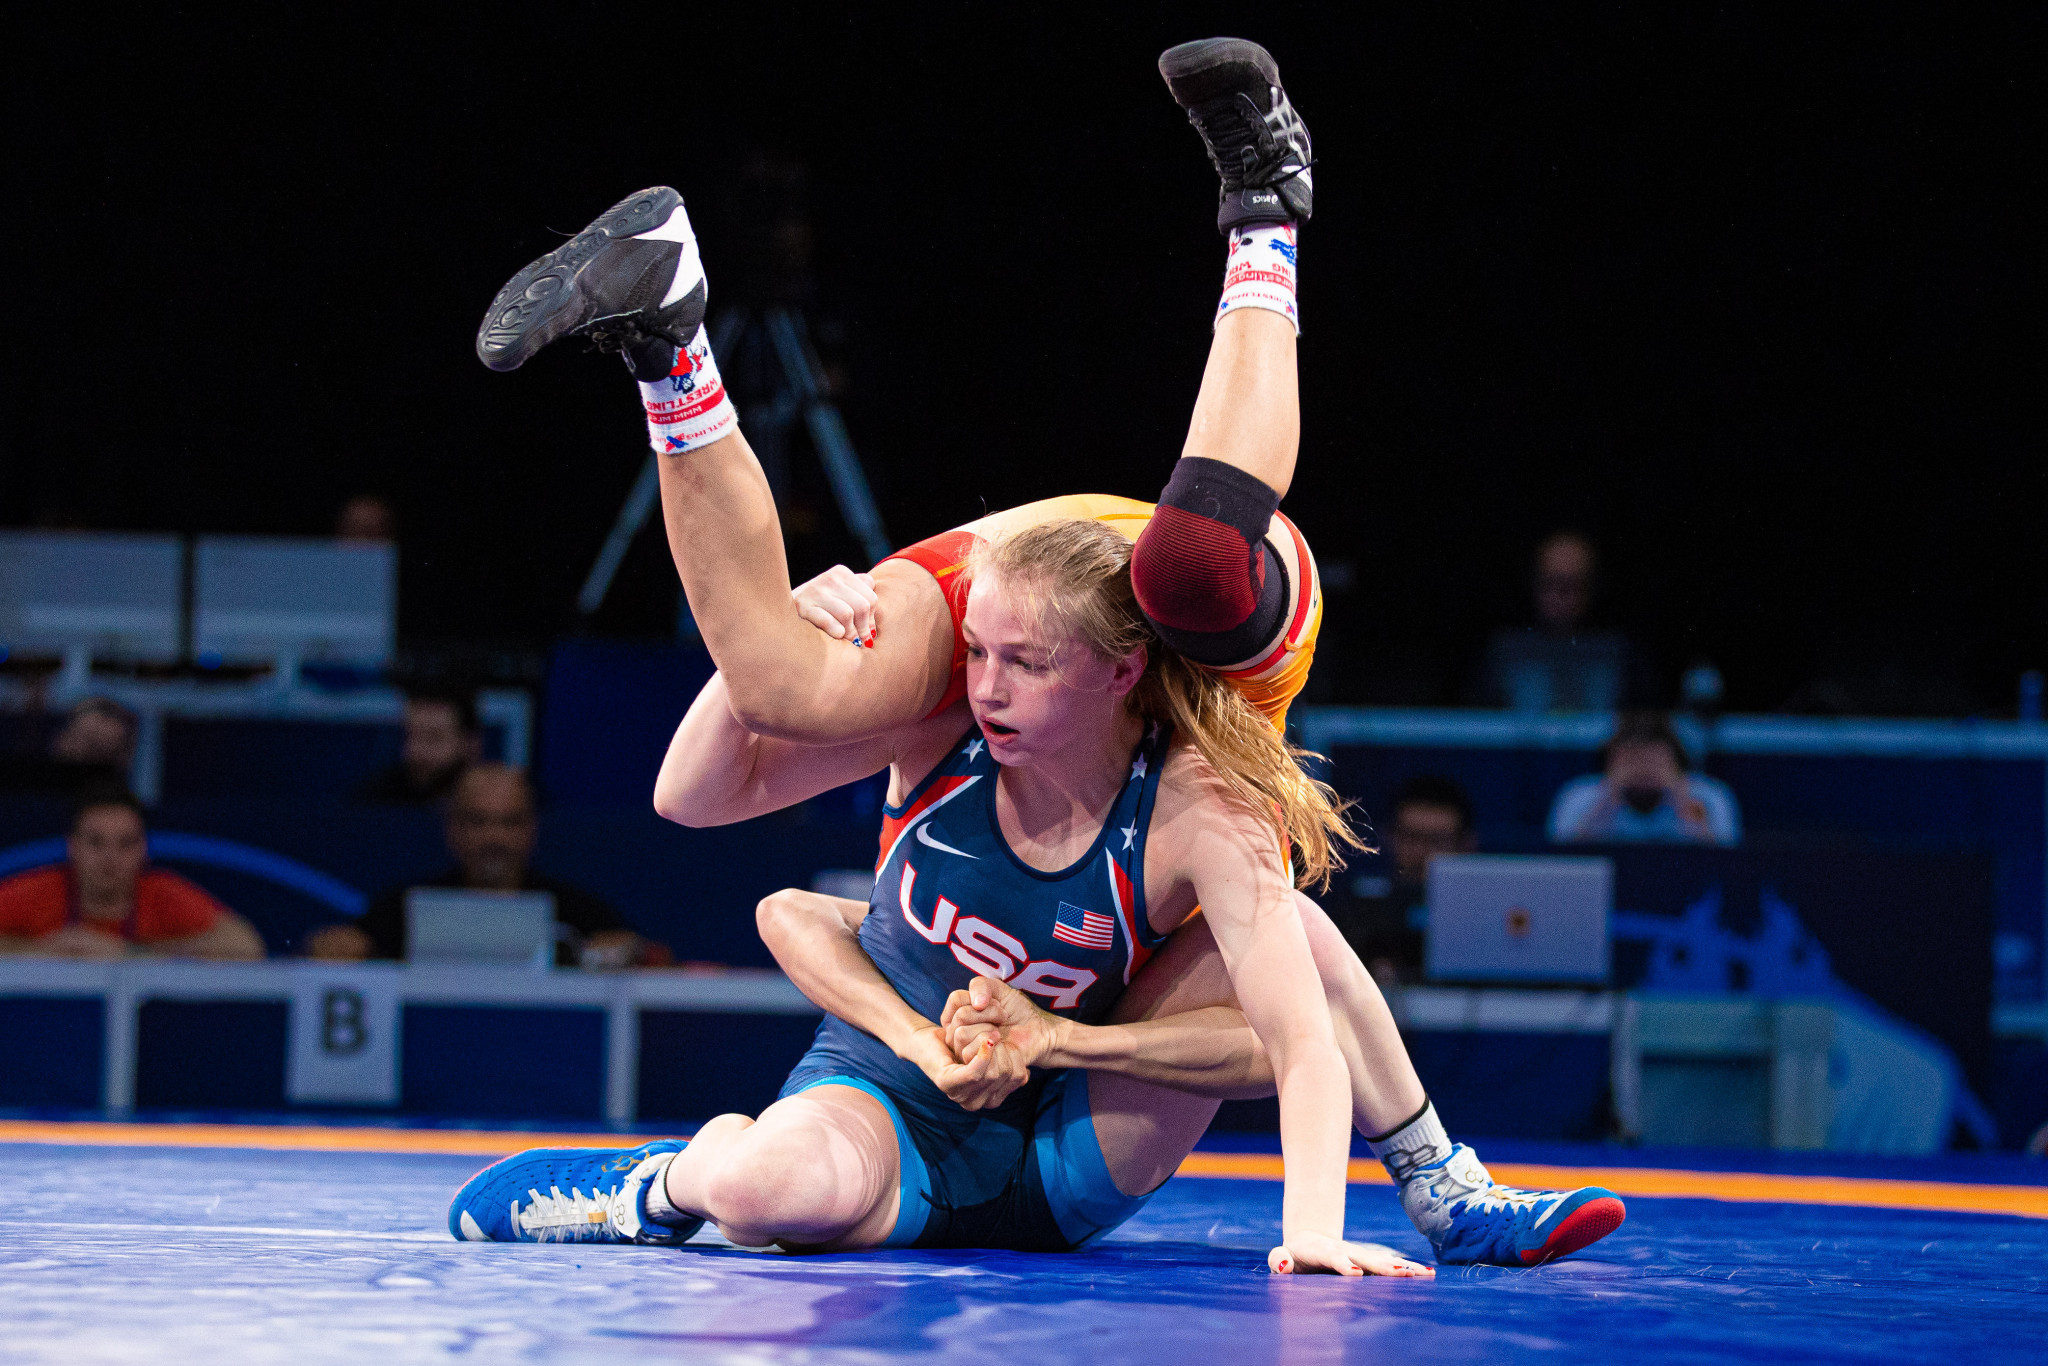 Shilson among victors on day four of UWW Under-23 World Championships with sensational headlock